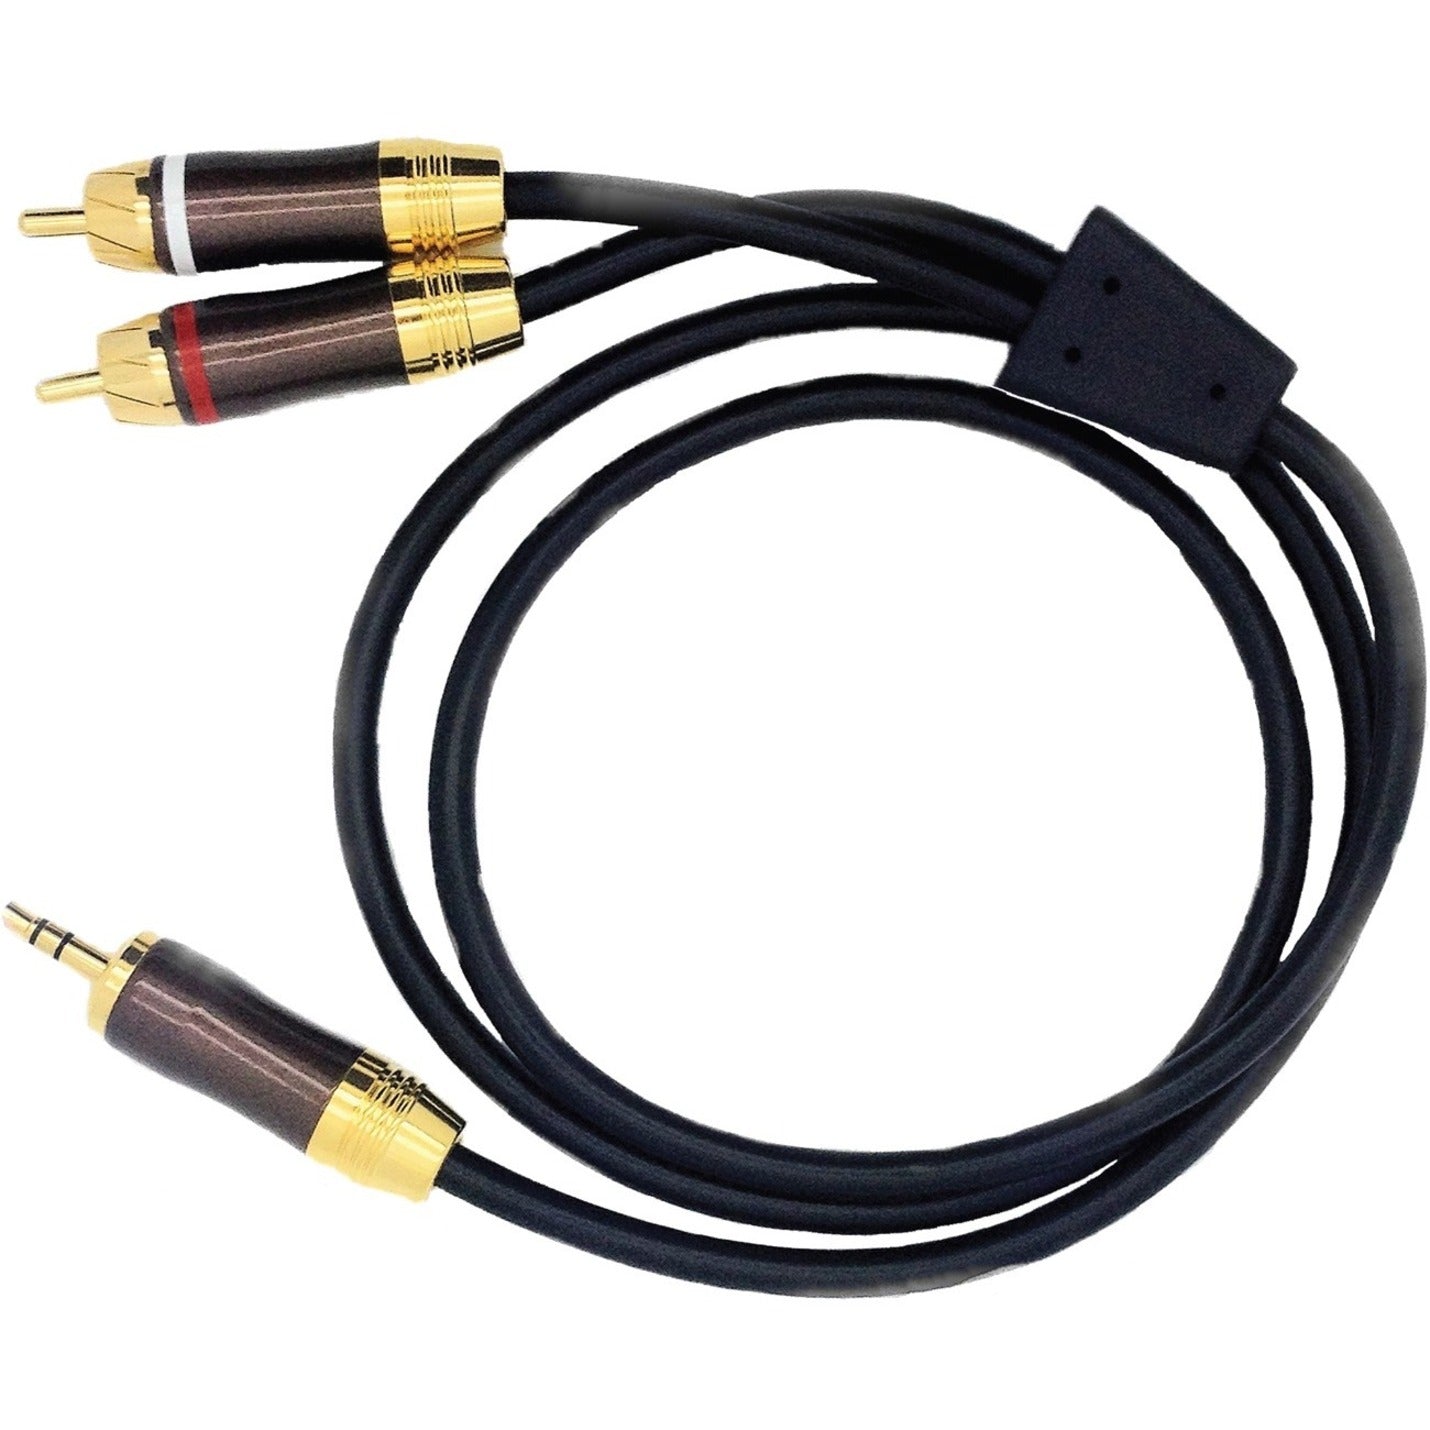 W Box VCY3BKG6 RCA to 3.5mm Stereo Y Cable, 6 ft, Gold Plated, Black